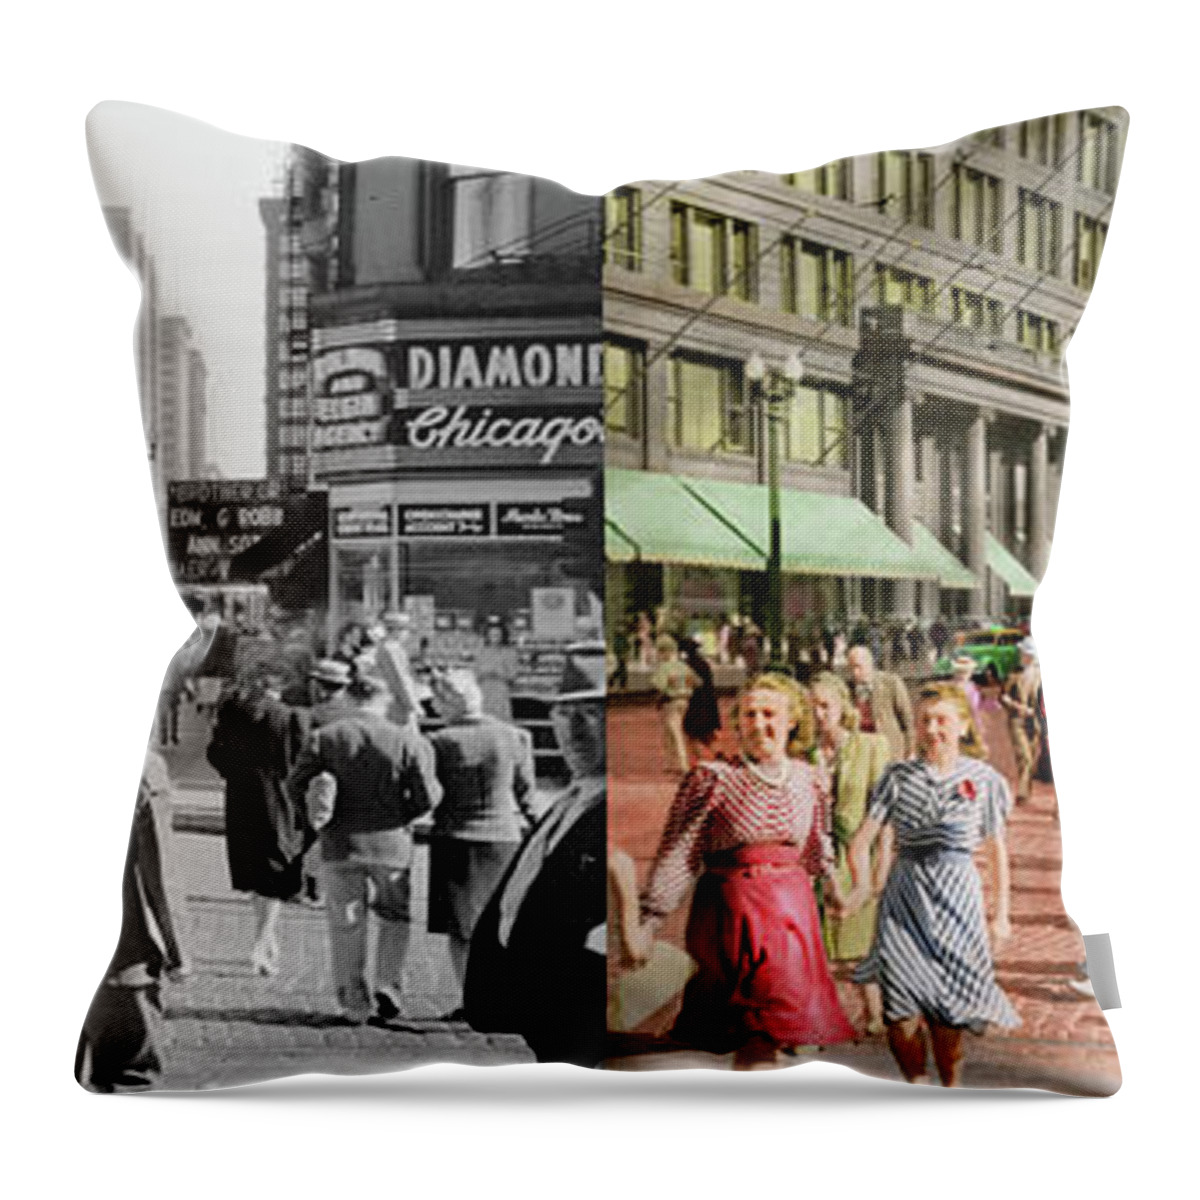 Chicago Throw Pillow featuring the photograph City - Chicago - Shopping Crowds 1940 - Side by Side by Mike Savad